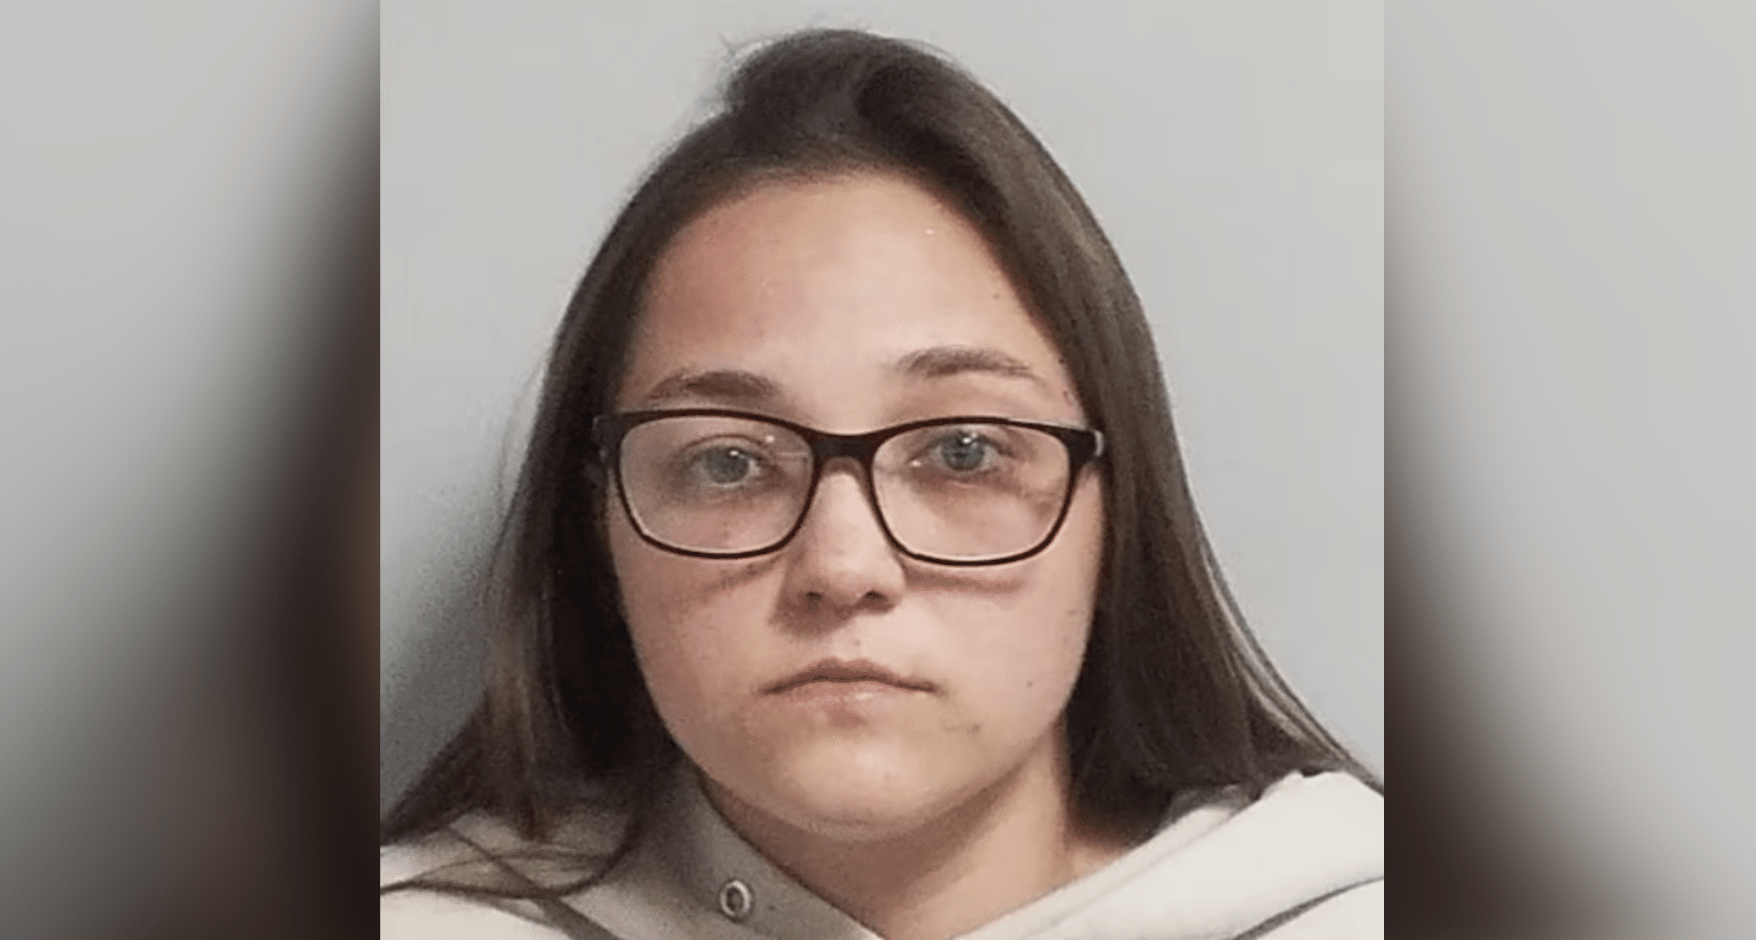 Ocean Springs woman arrested for punching officer in face during Mardi Gras parade